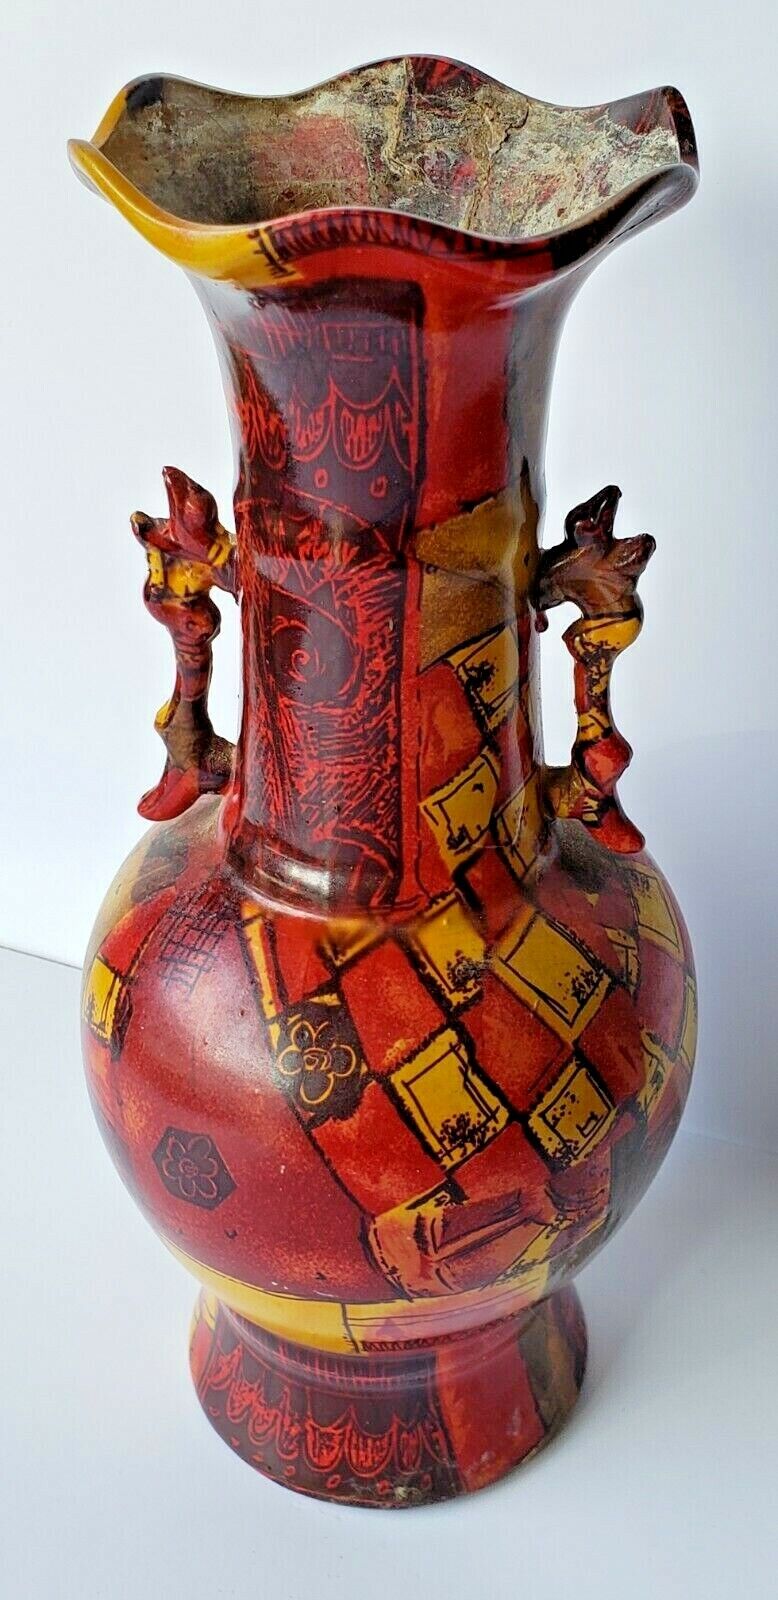 Art Of China Exhibit Pottery Vase Display Piece 2005 Larry Wang Framer Gallery